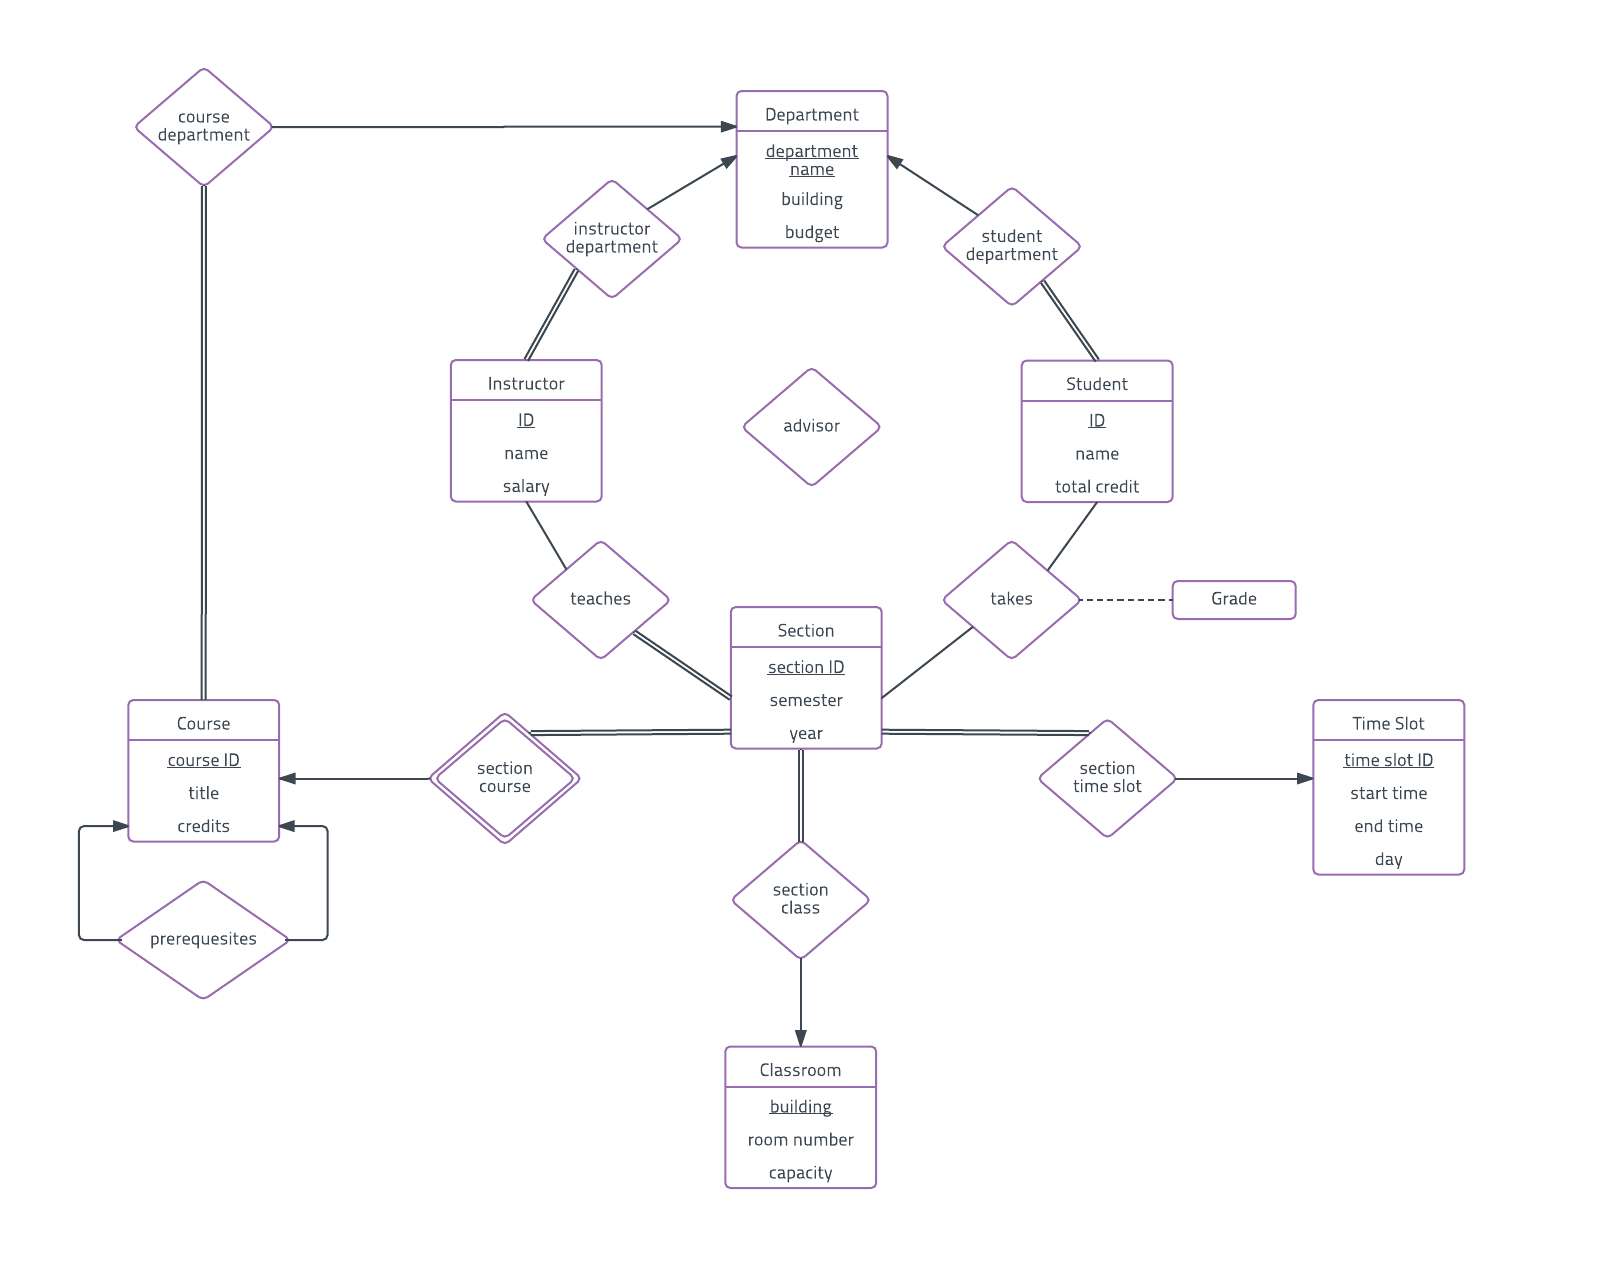 Er Diagram Examples And Templates | Lucidchart with regard to Er Diagram Question With Solutions In Dbms